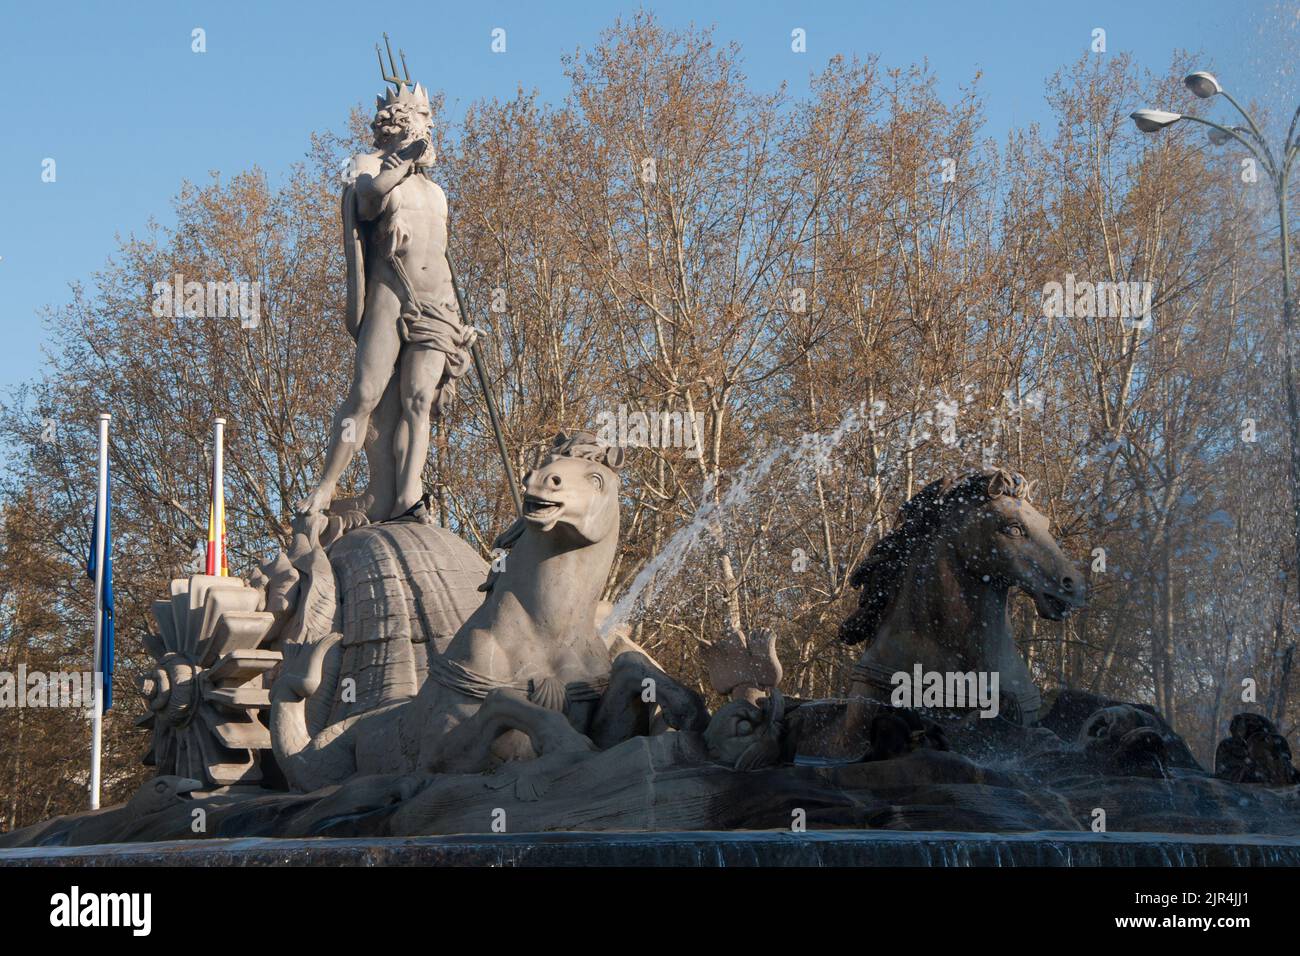 The fountain devoted to Neptune in a park in Madrid, Spain Stock Photo